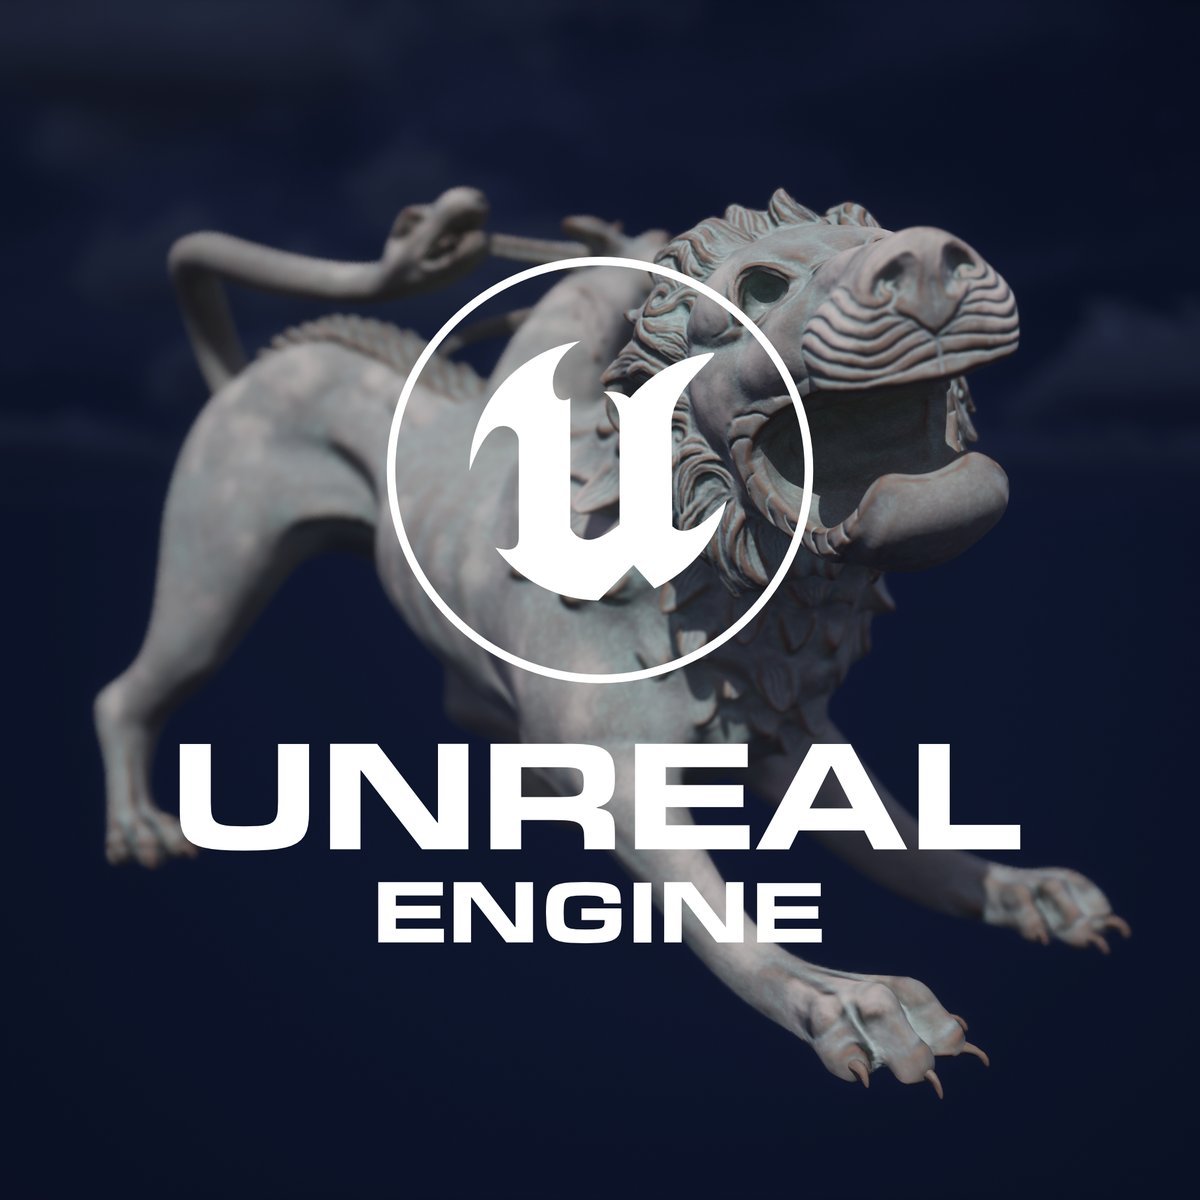 Milo runs Unreal Engine verion 5 under the hood, with dramatically improved render quality! We love how it feels, and hope you will too: nevercenter.com/milo #3dmodeling #rendering #archviz #gamedev #gameart